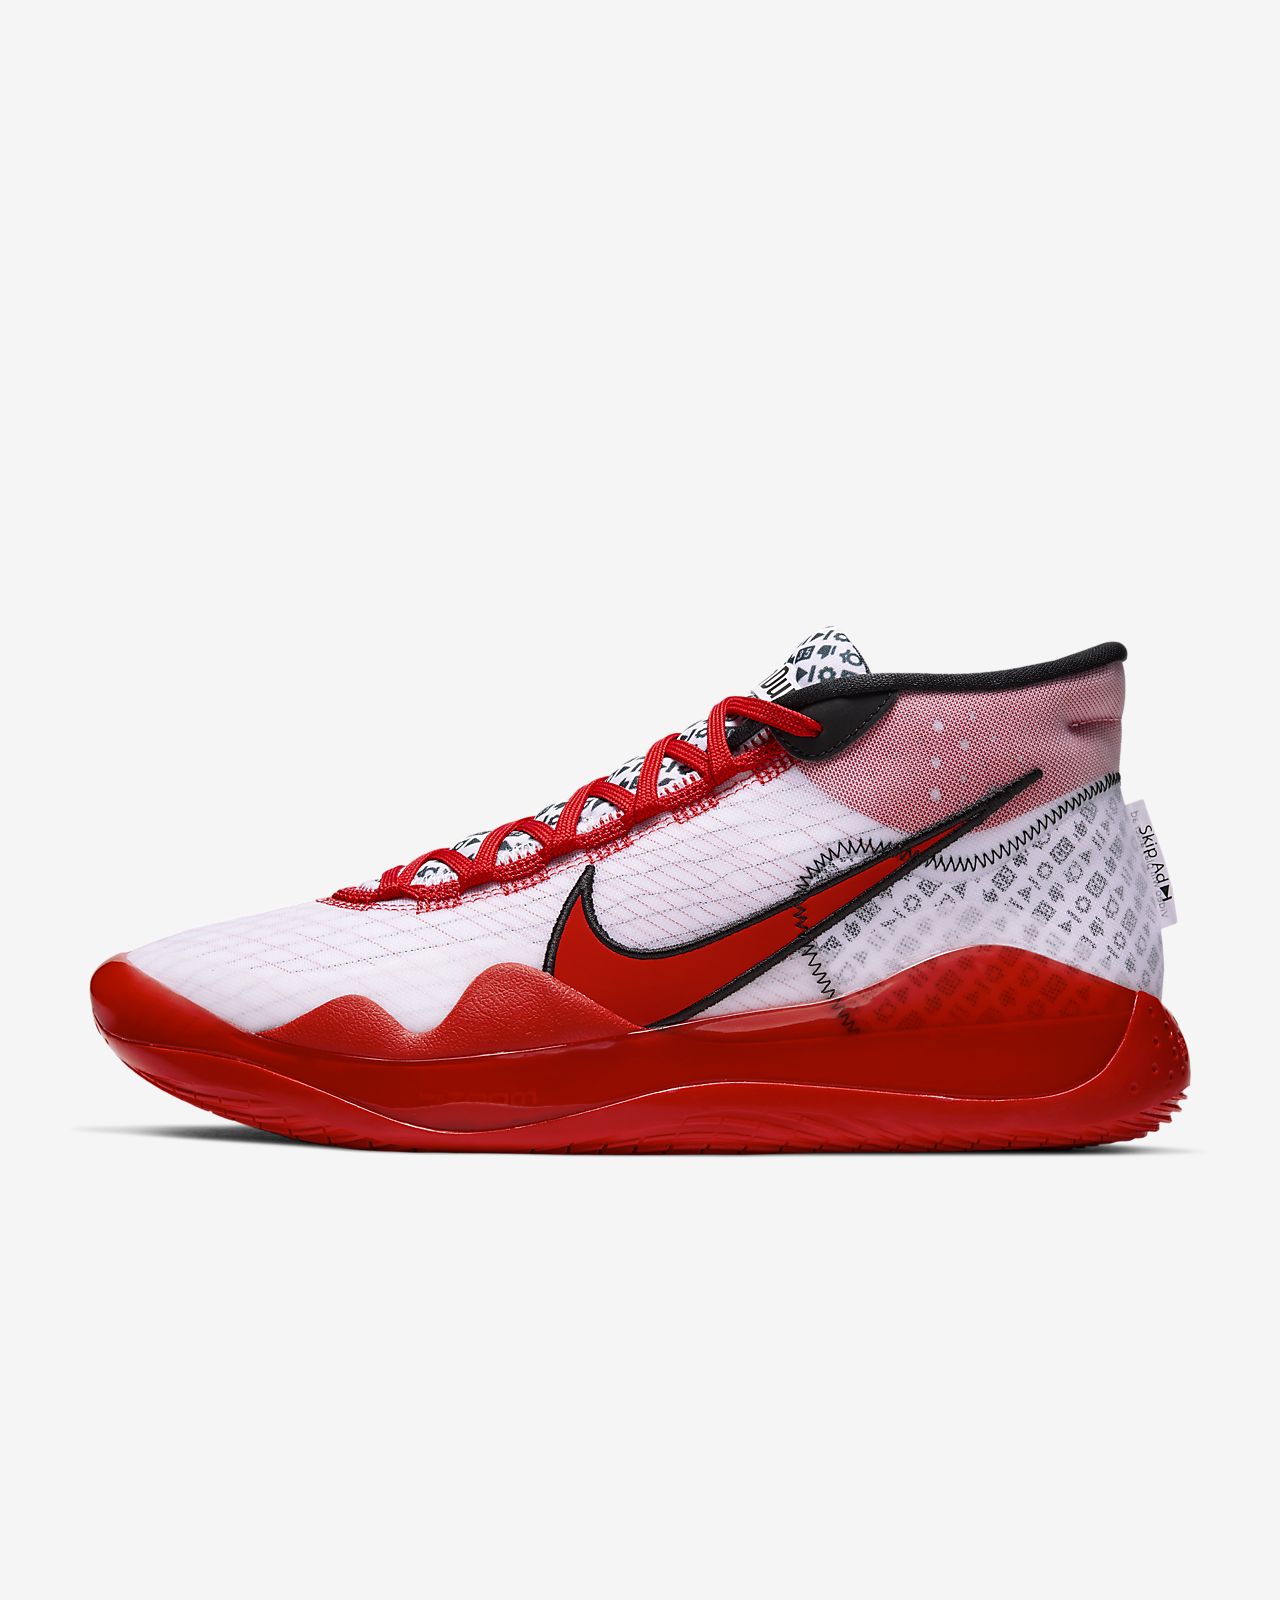 kevin durant youth basketball shoes